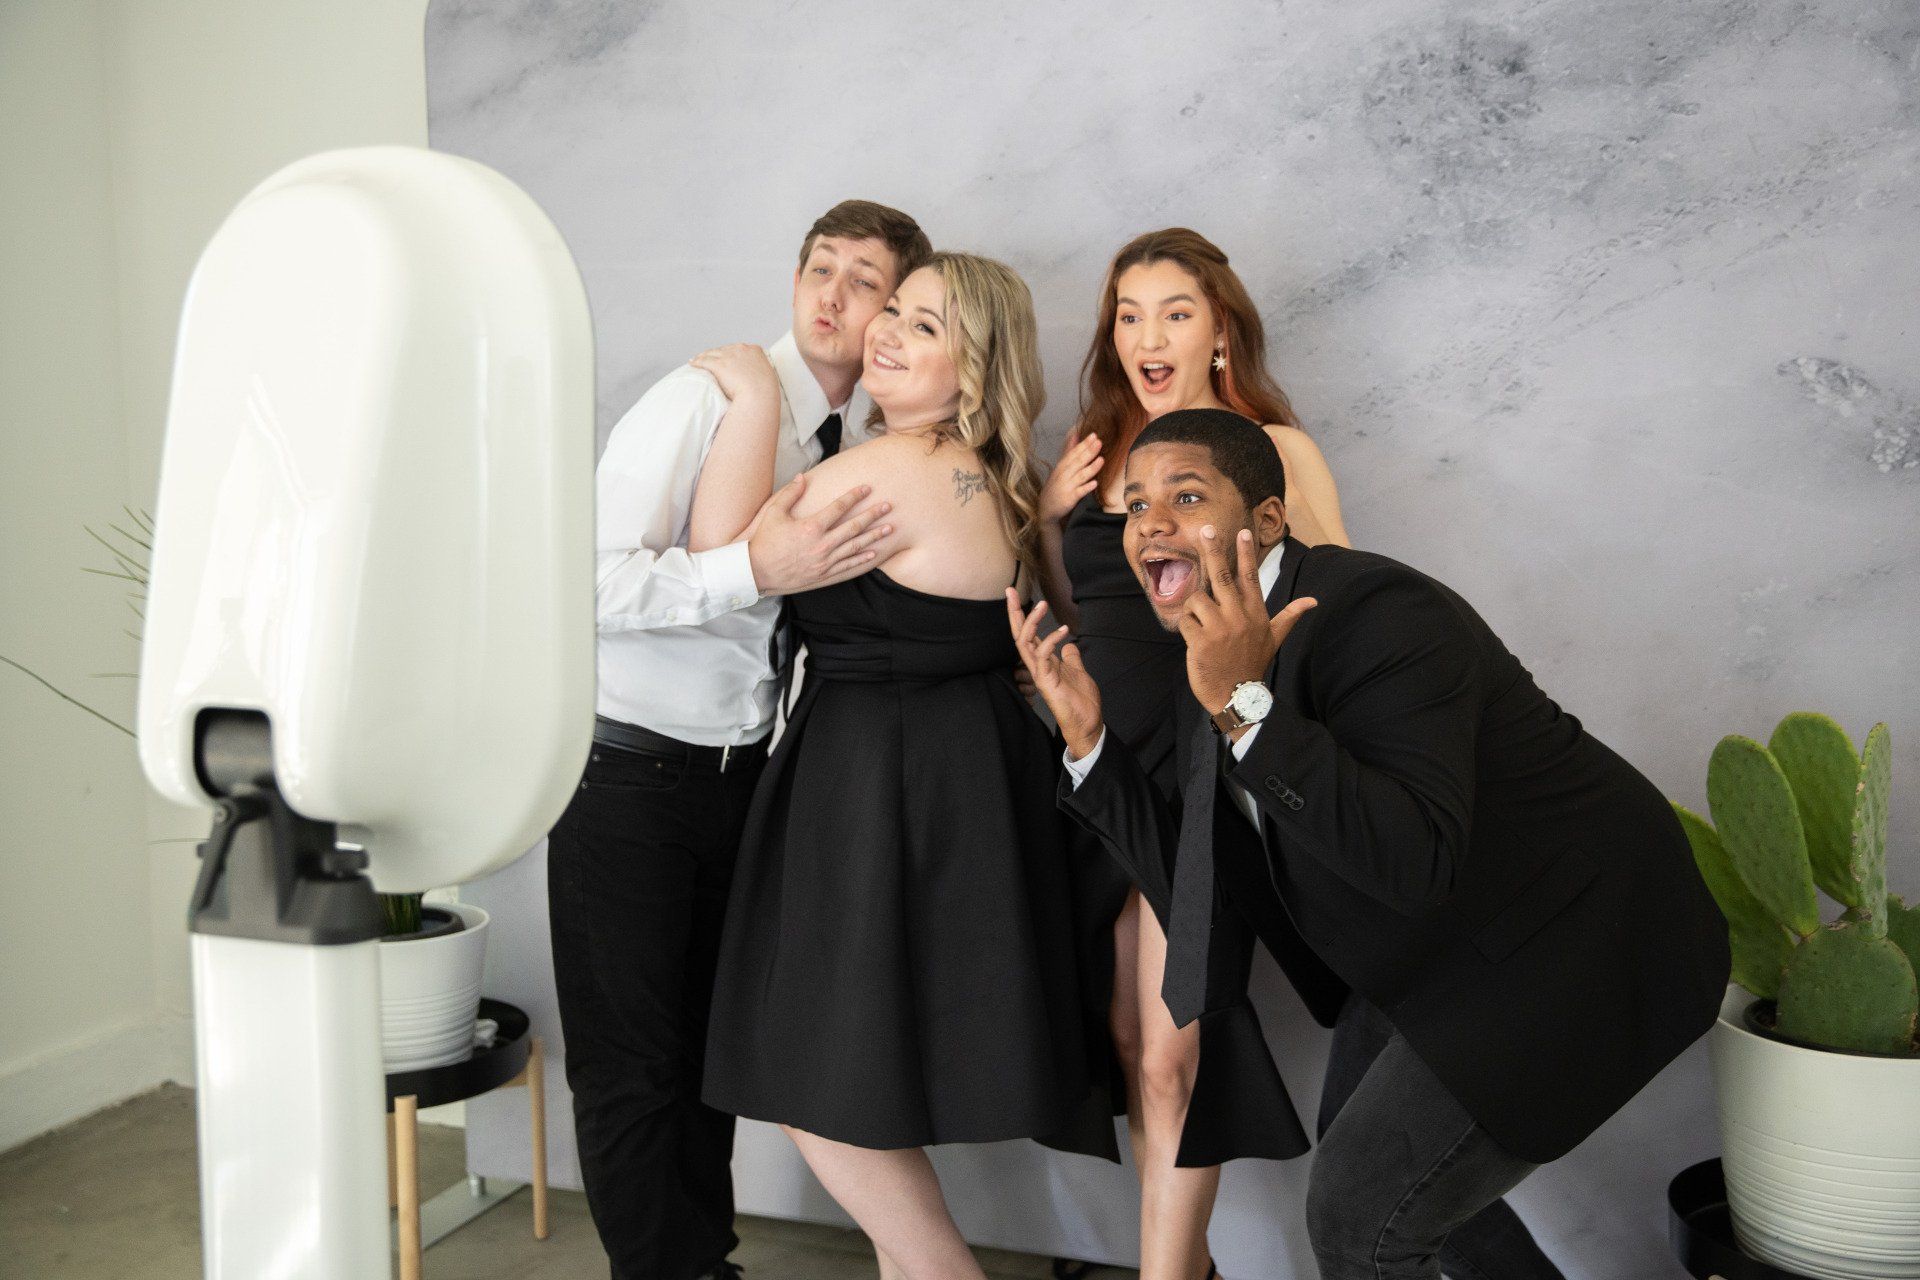 Open photobooth with 4 people posing and smiling with a gray background.